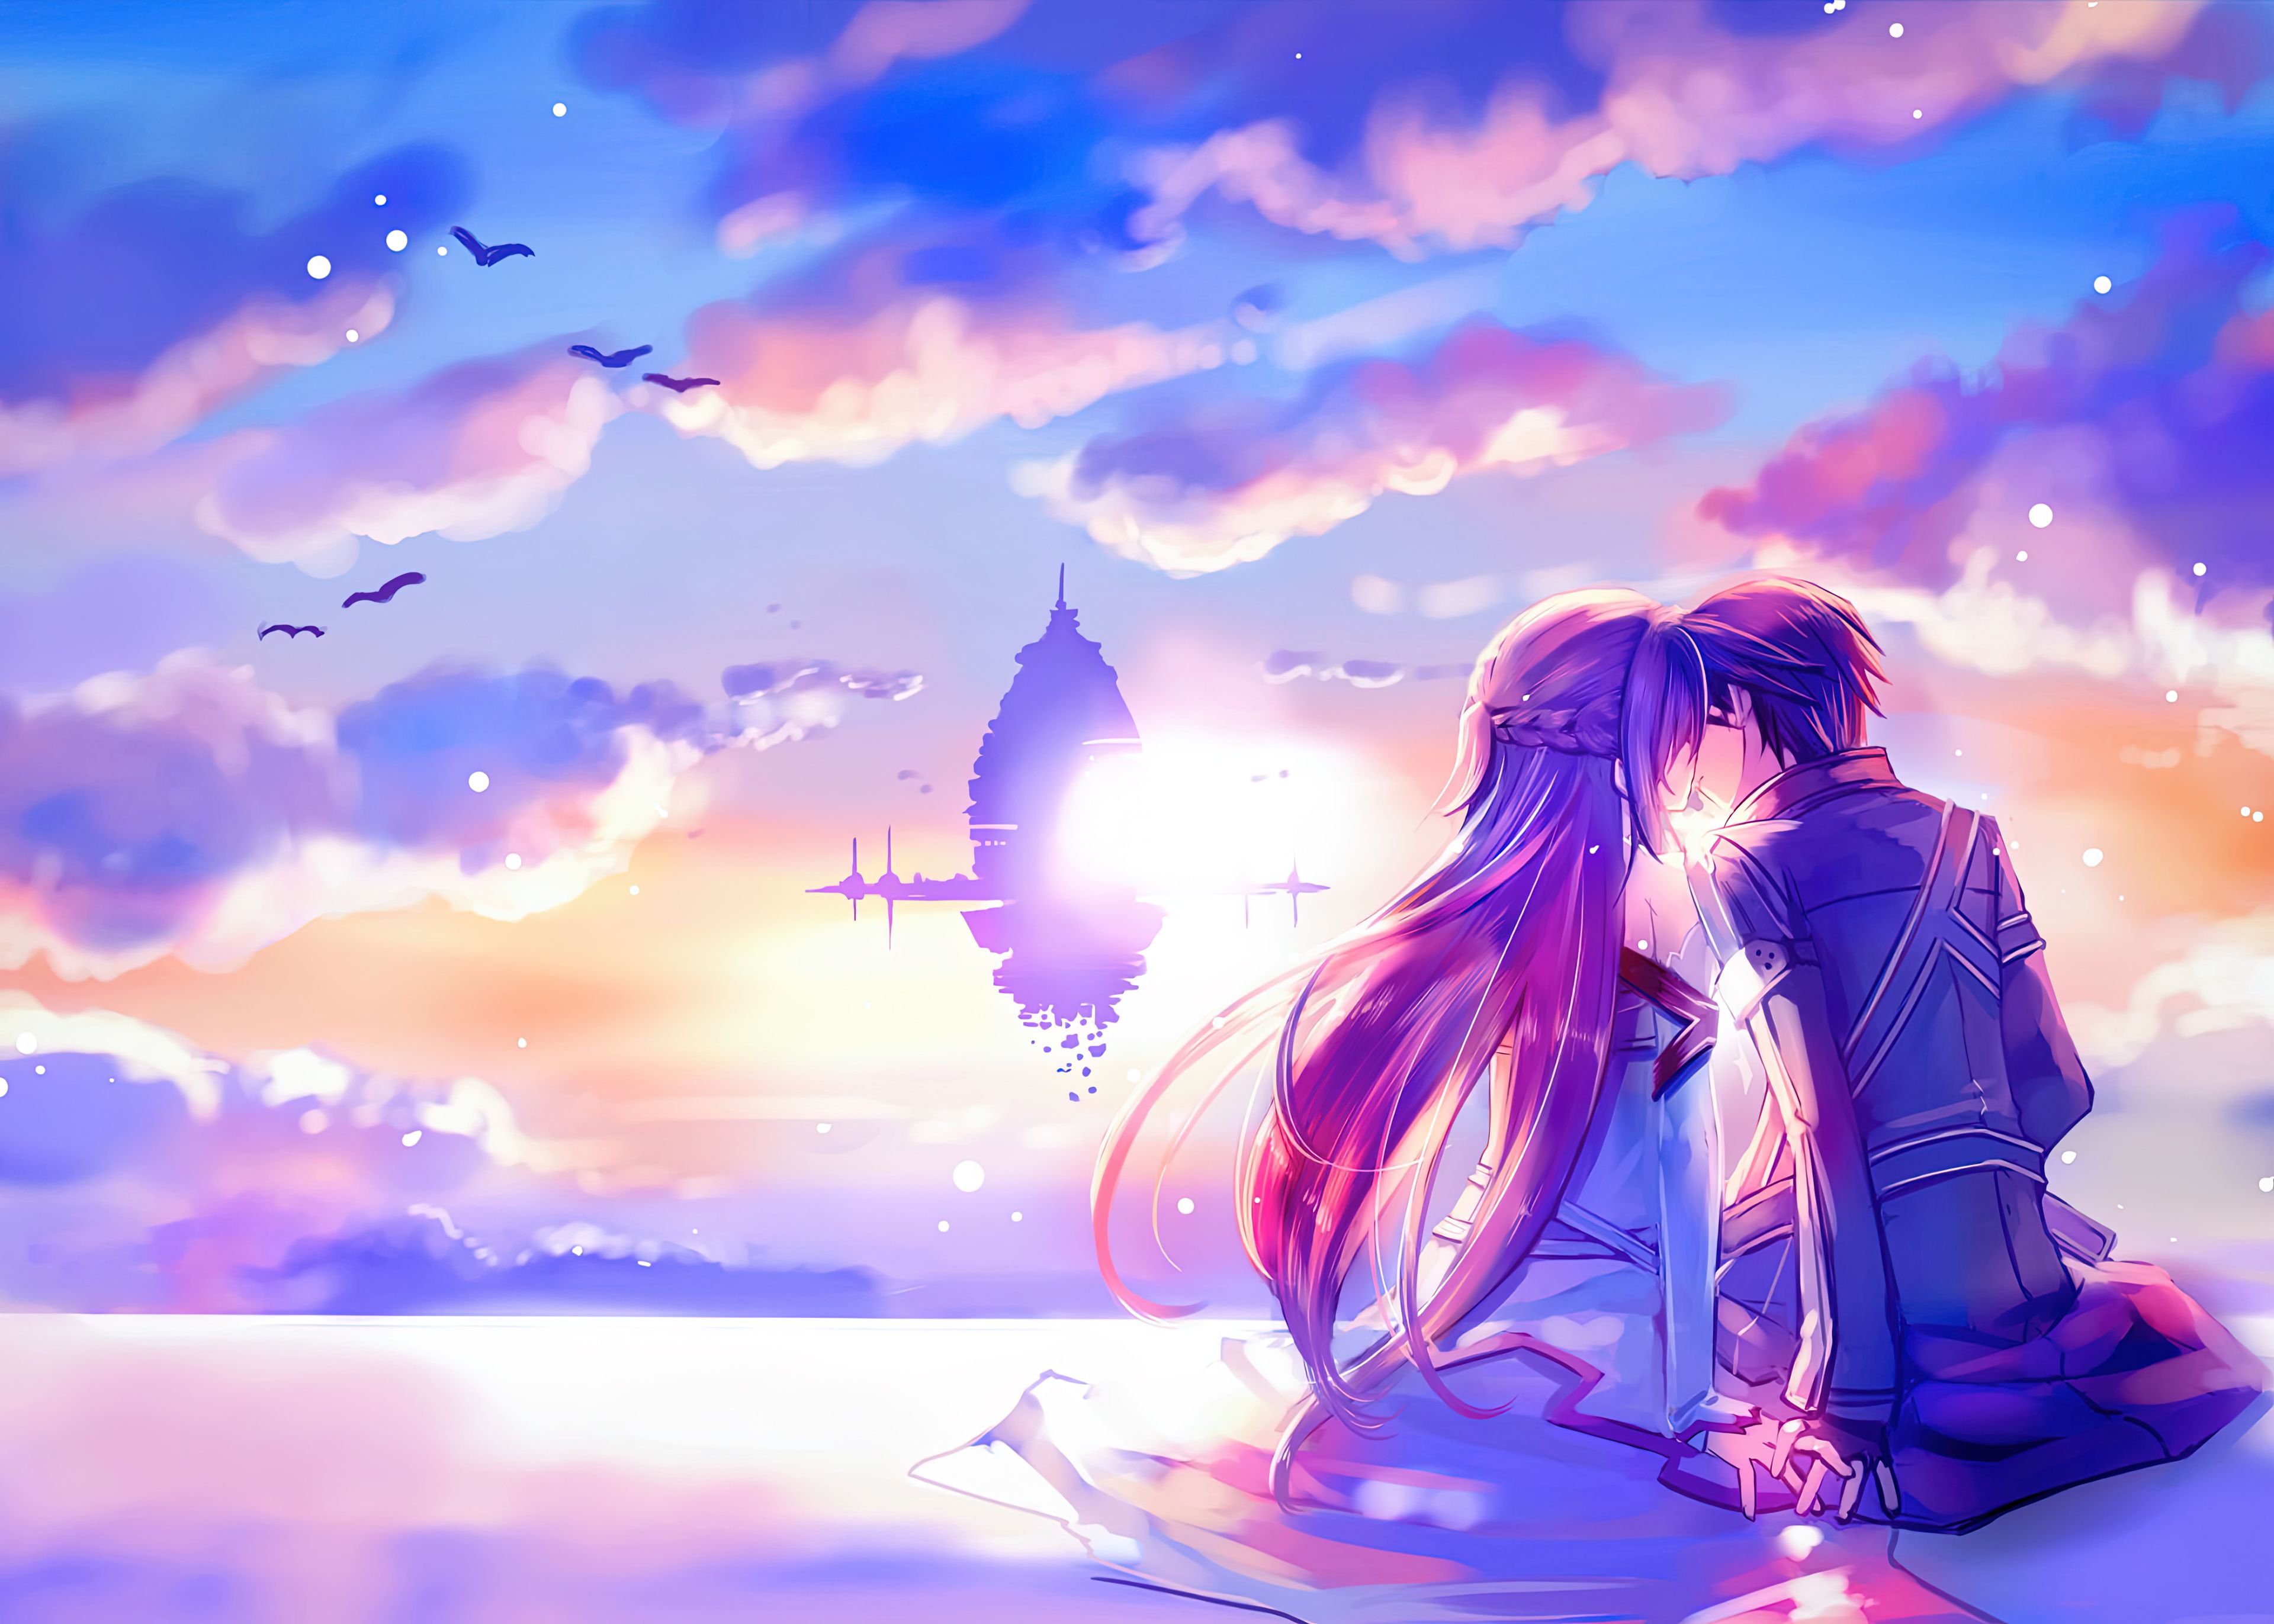 Anime wallpaper of a girl and a guy sitting on the shore of a lake - Anime